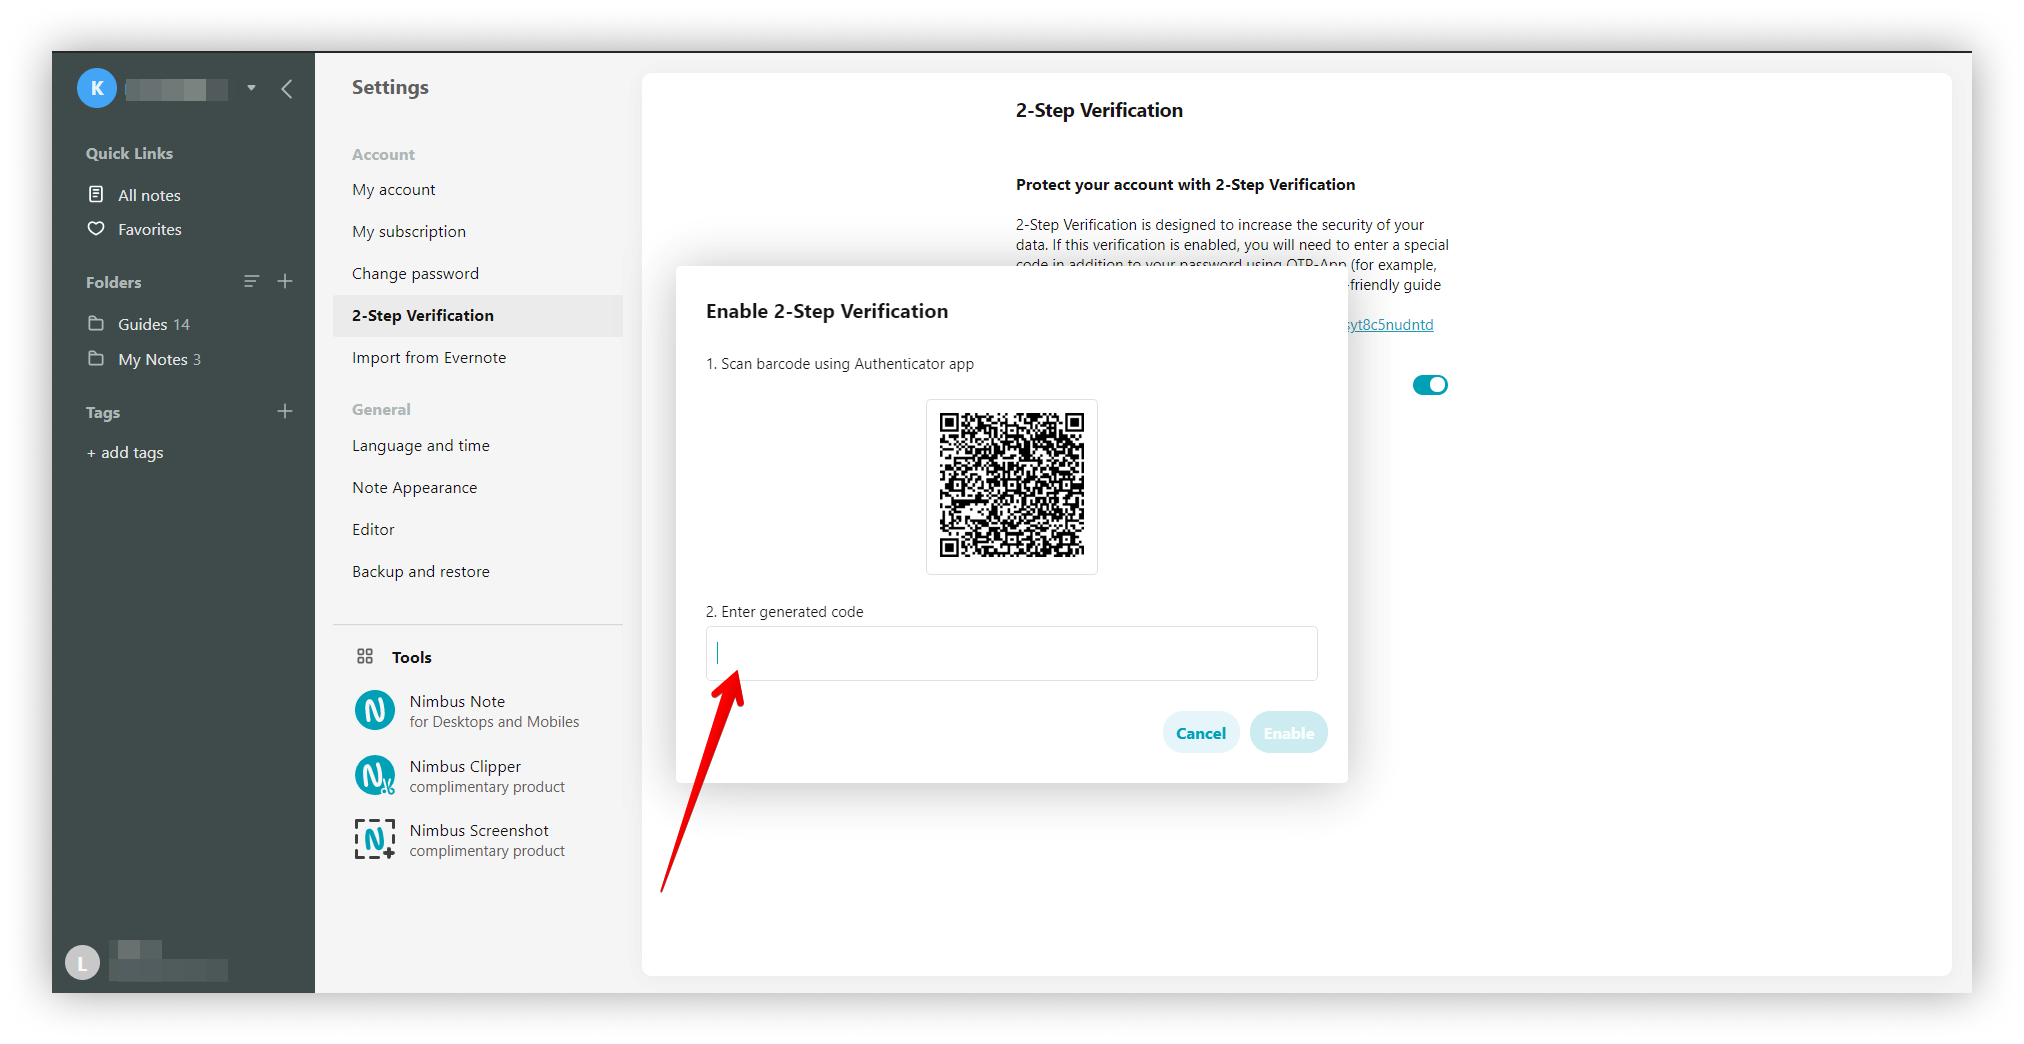 Scan barcode using Authenticator app and enter generated code. Then Press the Enable button.